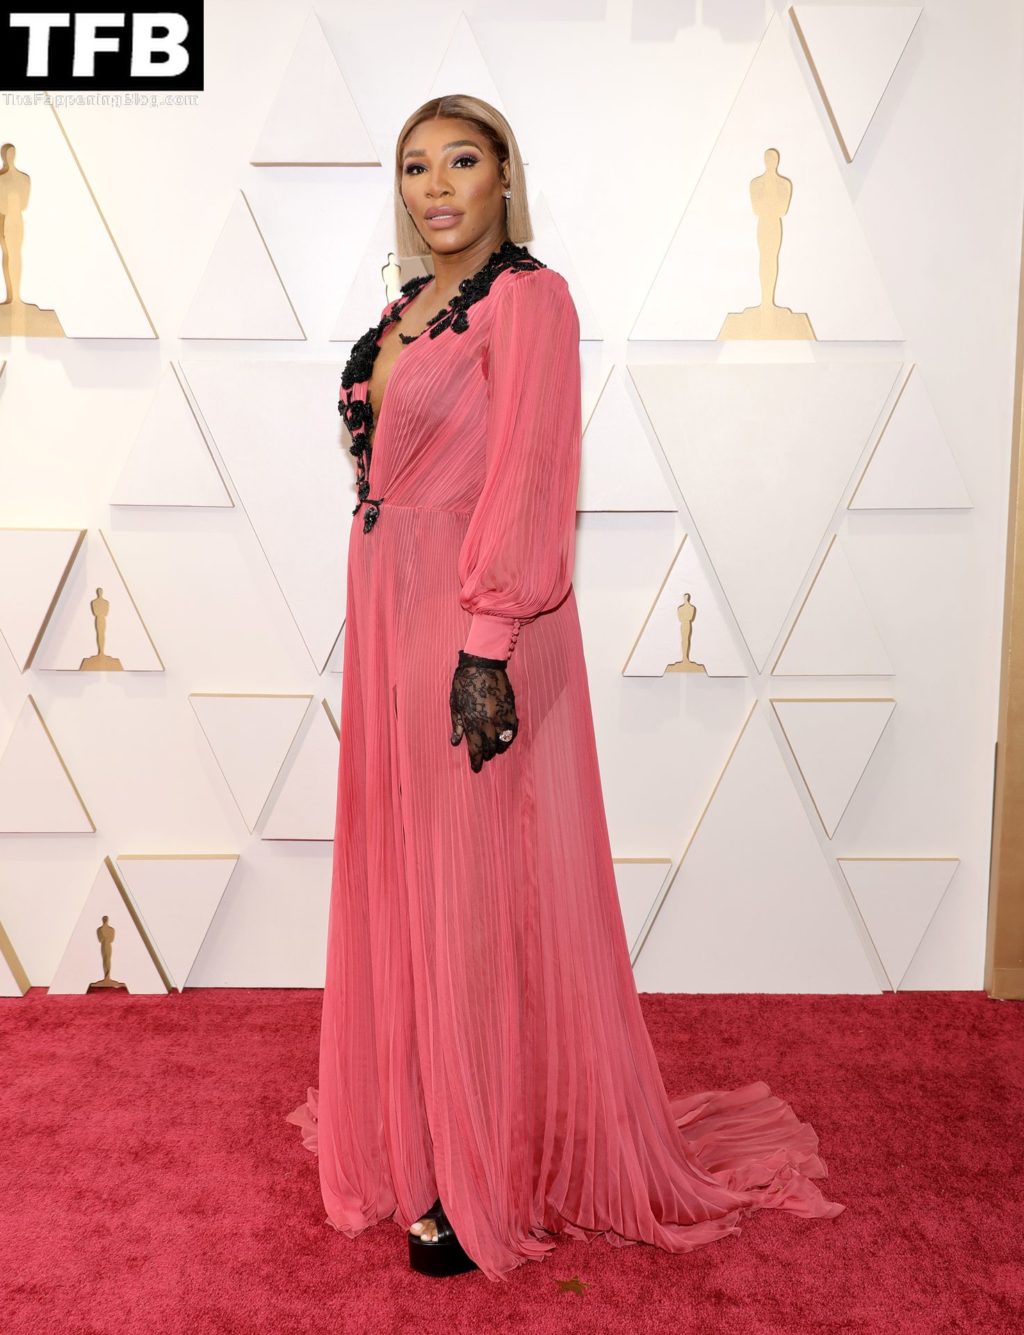 Serena Williams Sexy The Fappening Blog 3 1024x1335 - Serena Williams Poses on the Red Carpet at the 94th Annual Academy Awards (3 Photos)